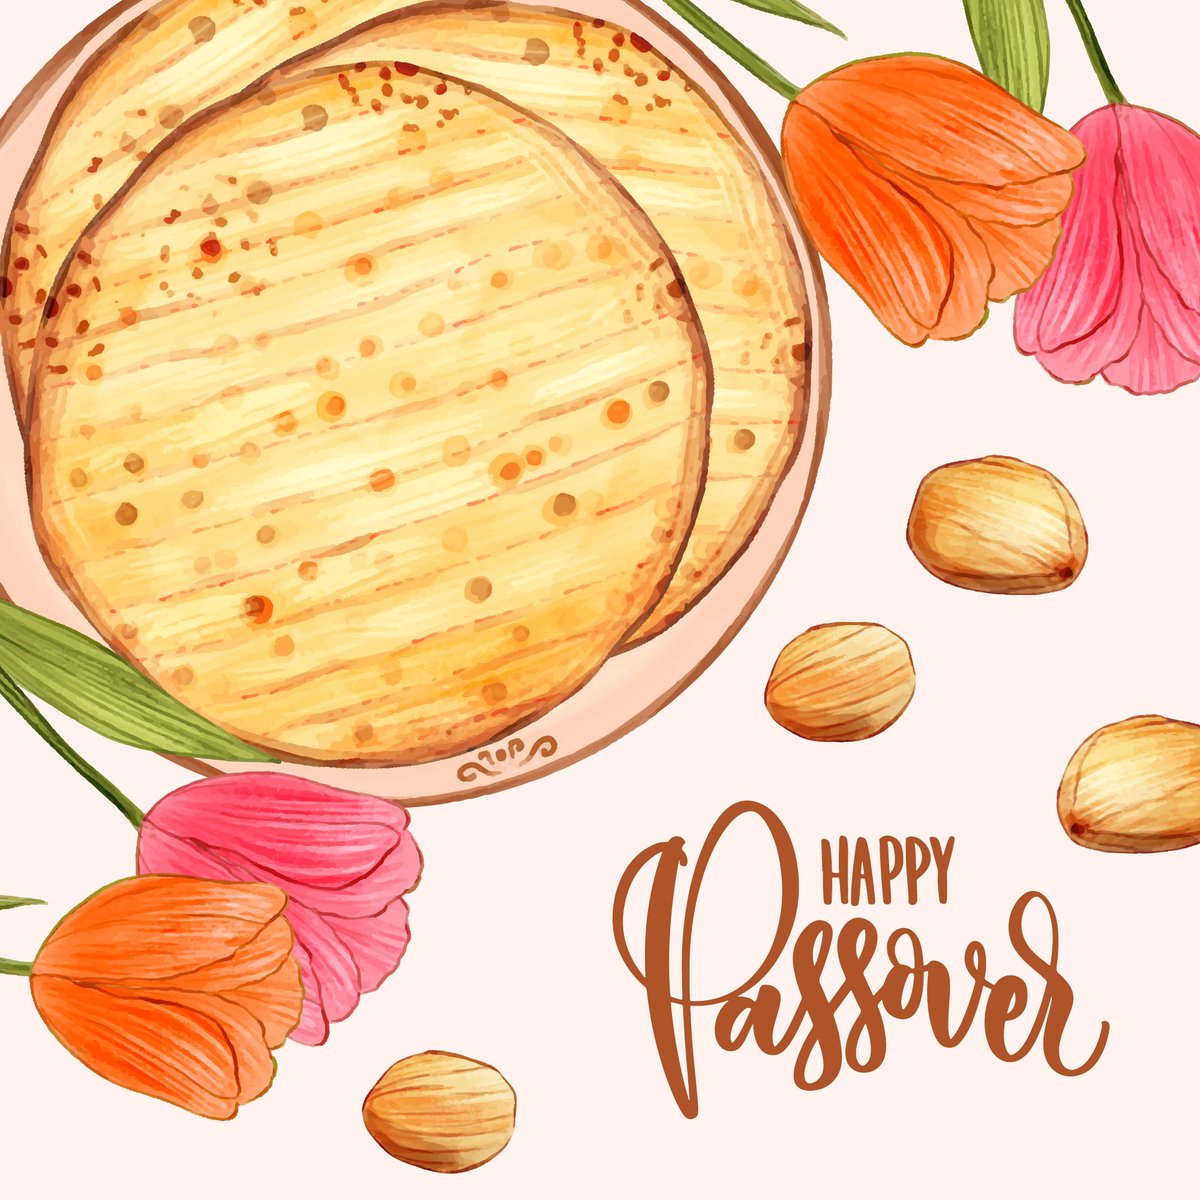 Chag Pesach Sameach to all our Jewish friends! Let goodness and light win!